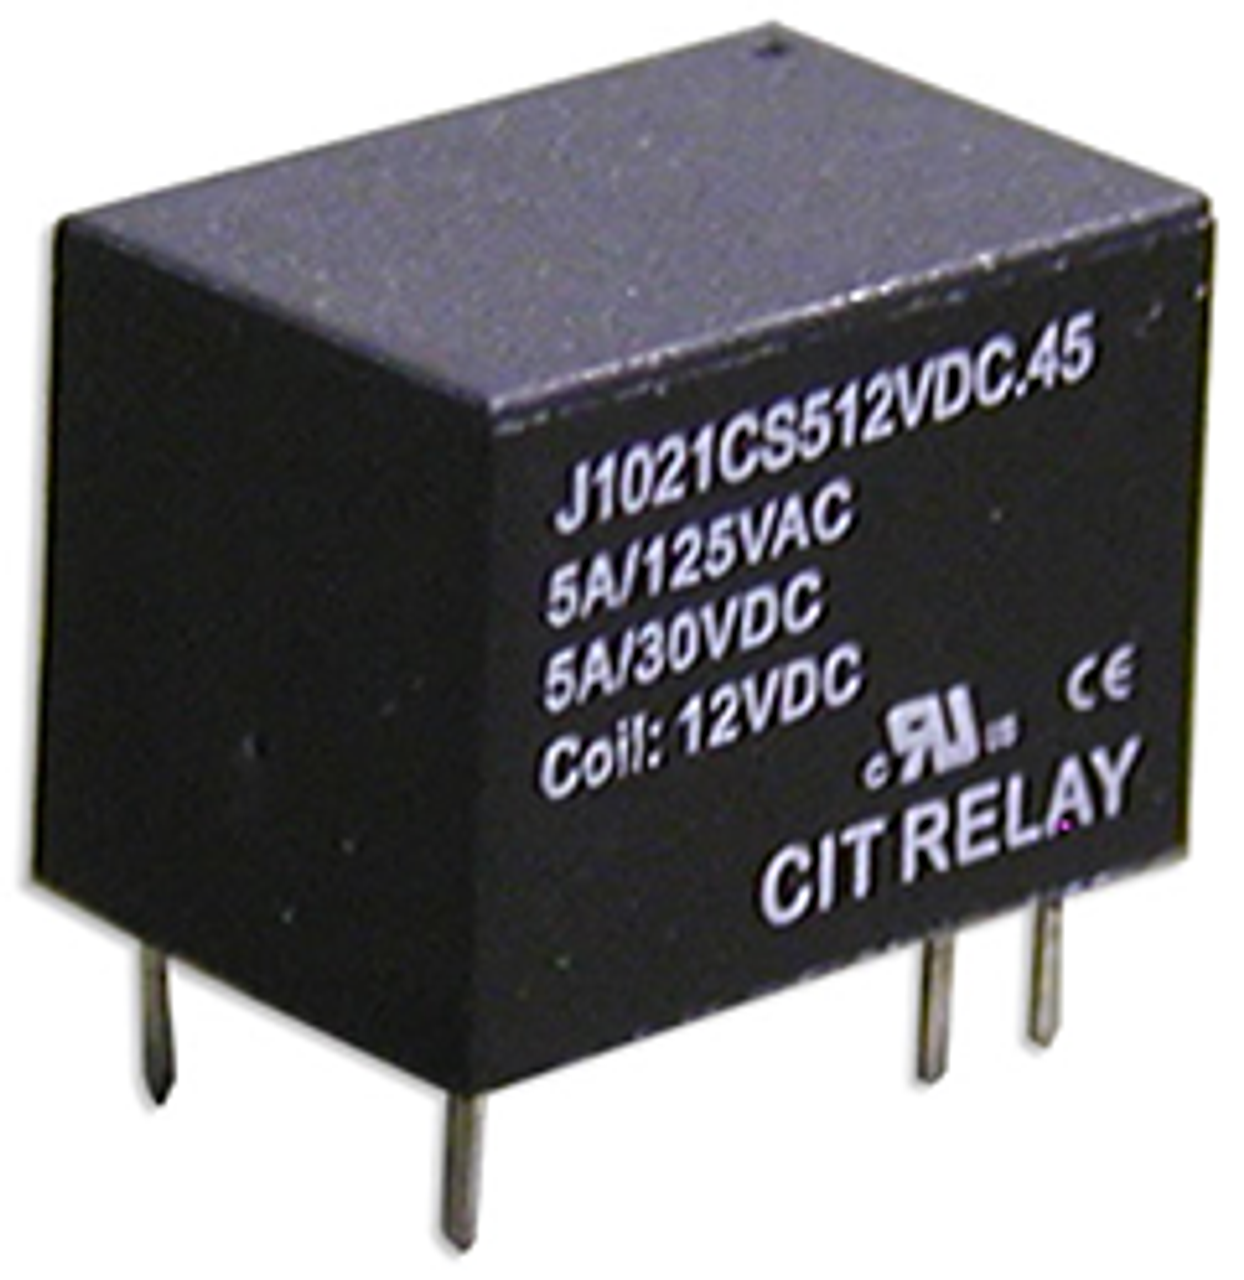 CIT Relay and Switch J1021AS324VDC.36 Power Relays